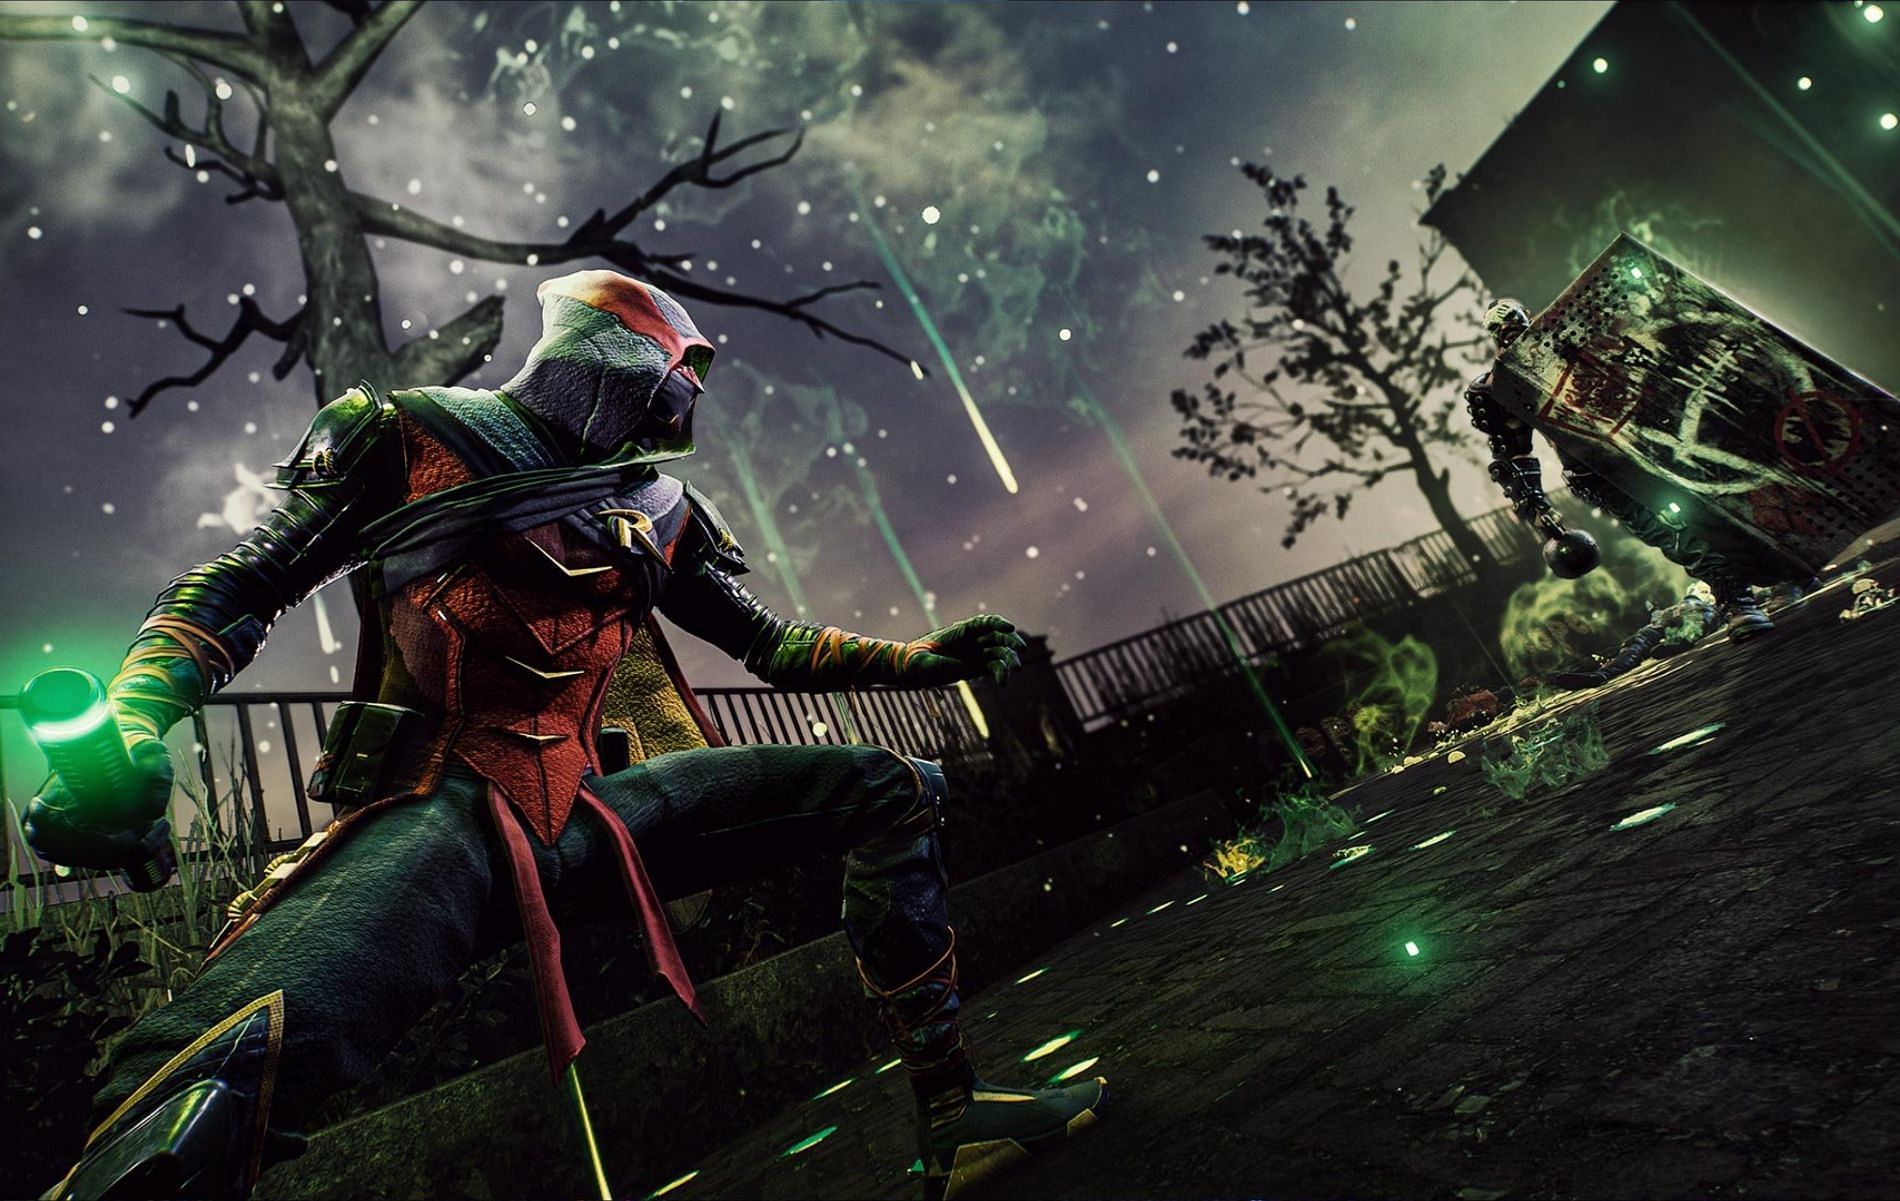 Robin unleashes his Fireworks Ability in Gotham Knights that deals elemental damage in an area (image via WB Games)